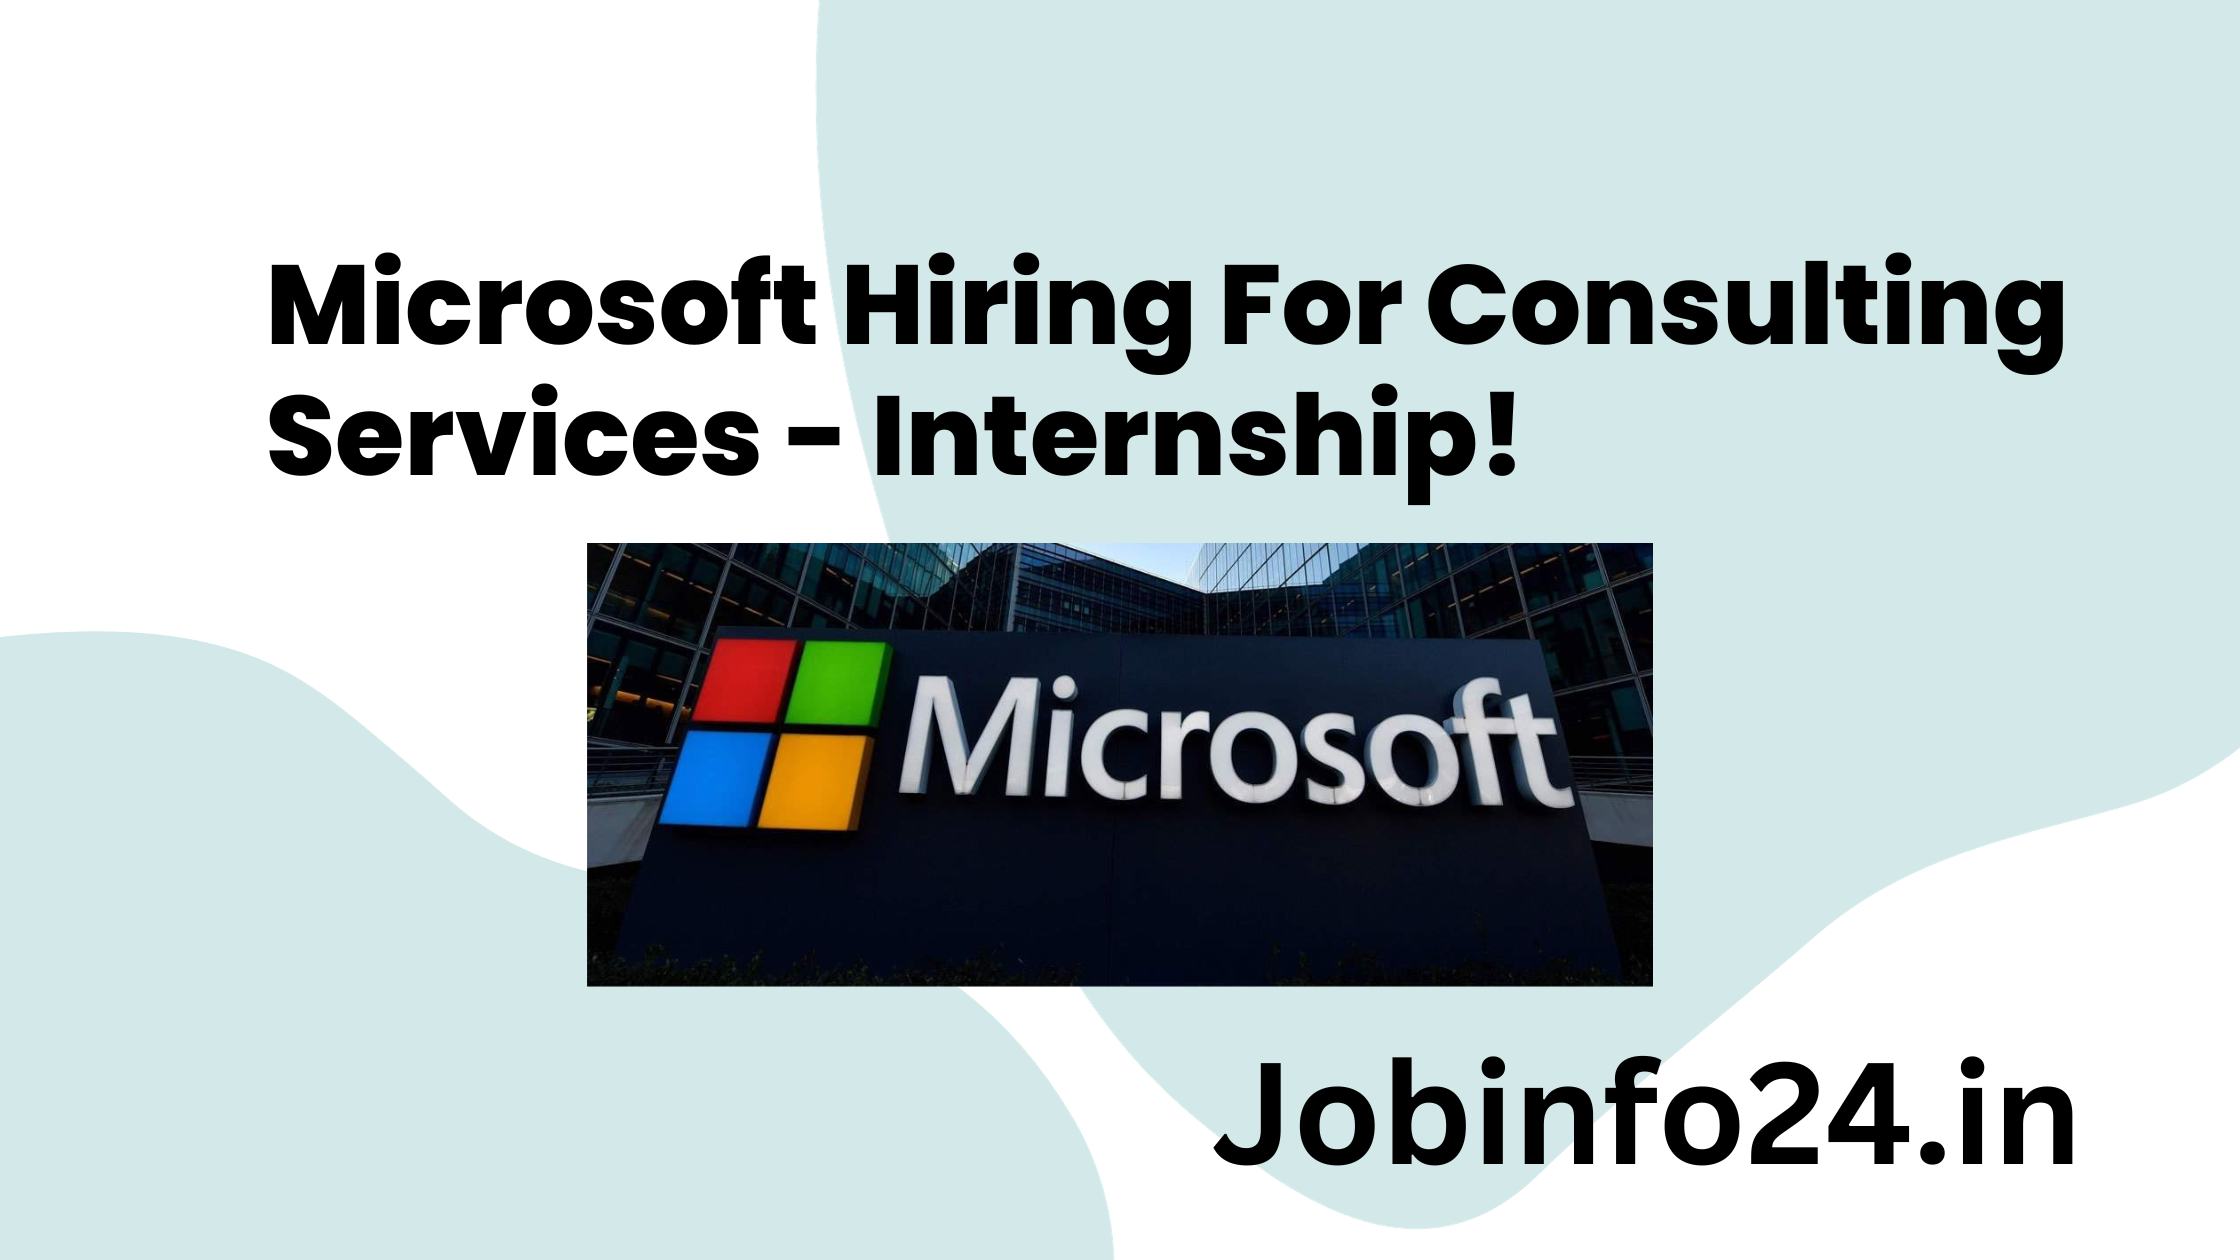 Microsoft Hiring For Consulting Services - Internship!